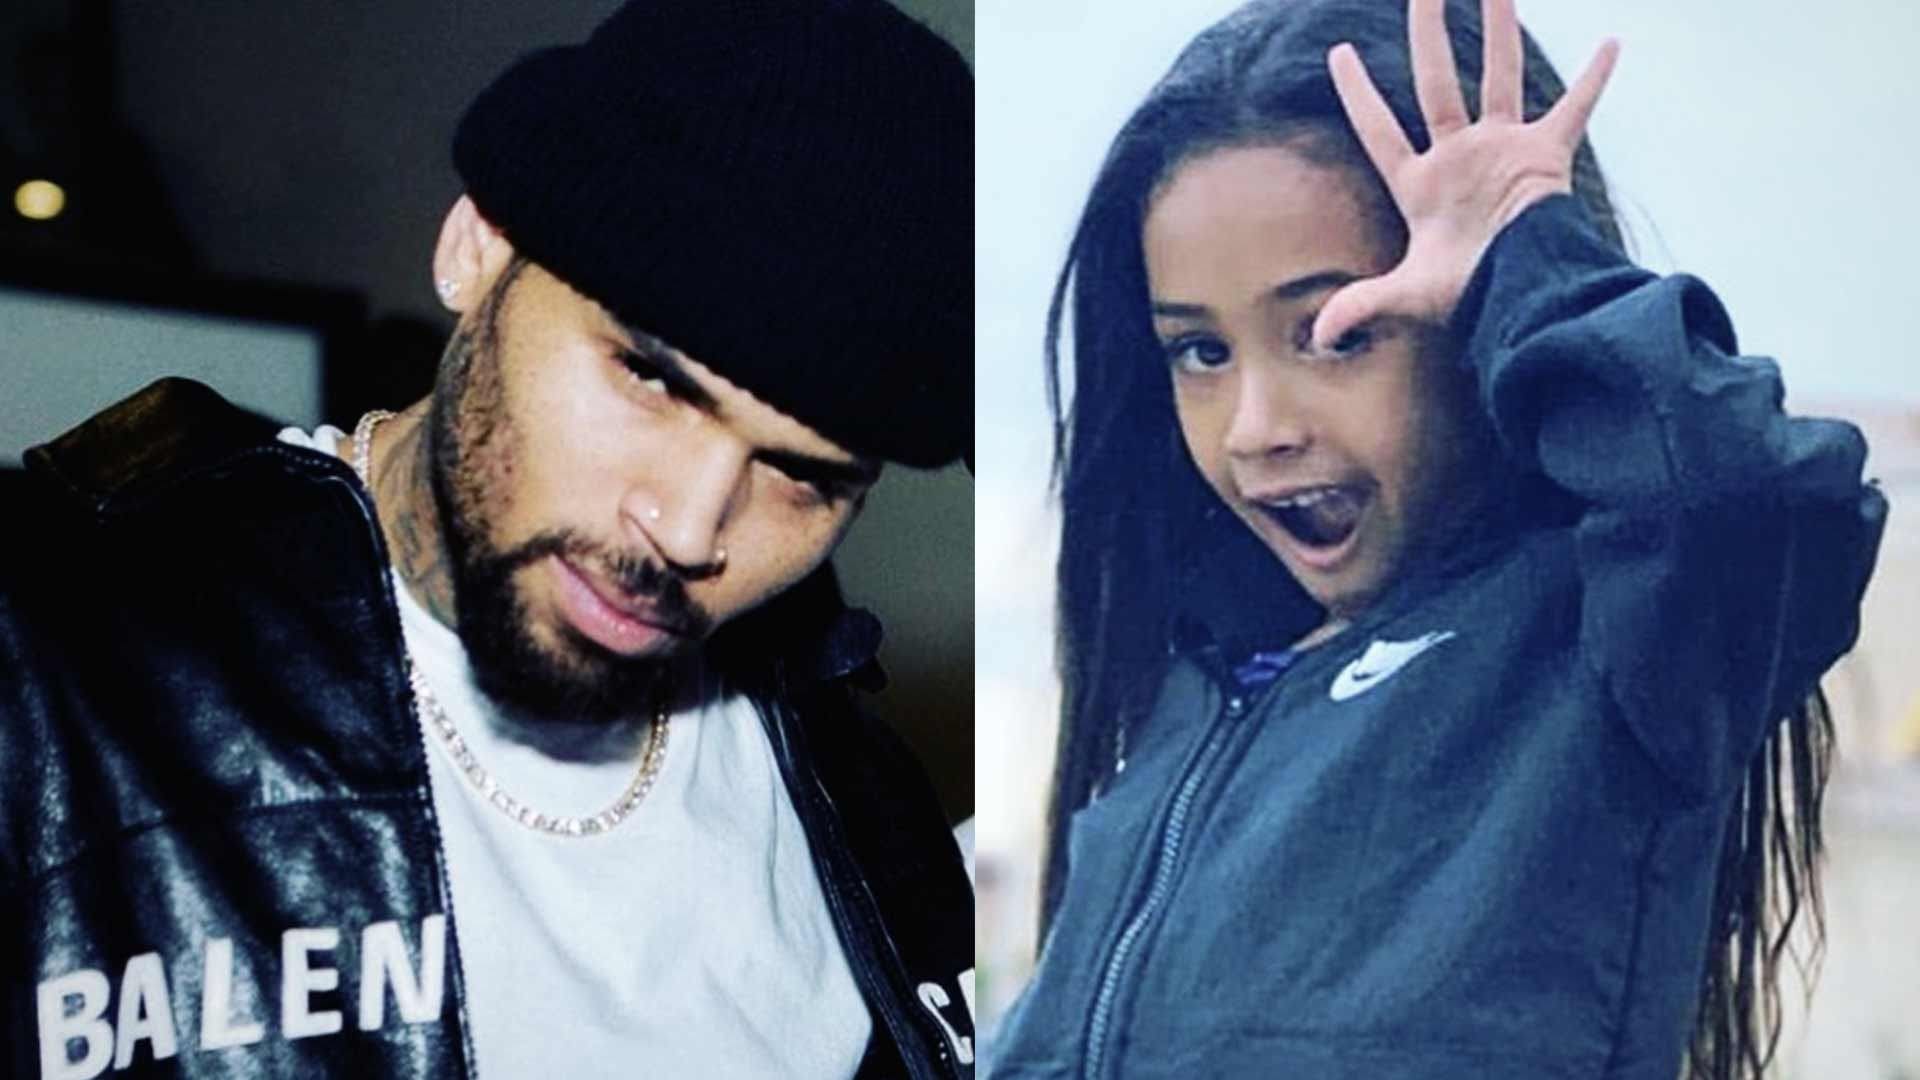 Chris Brown's Video In Which He's Playing Basketball With His Daughter, Royalty Brown Makes Fans Happy